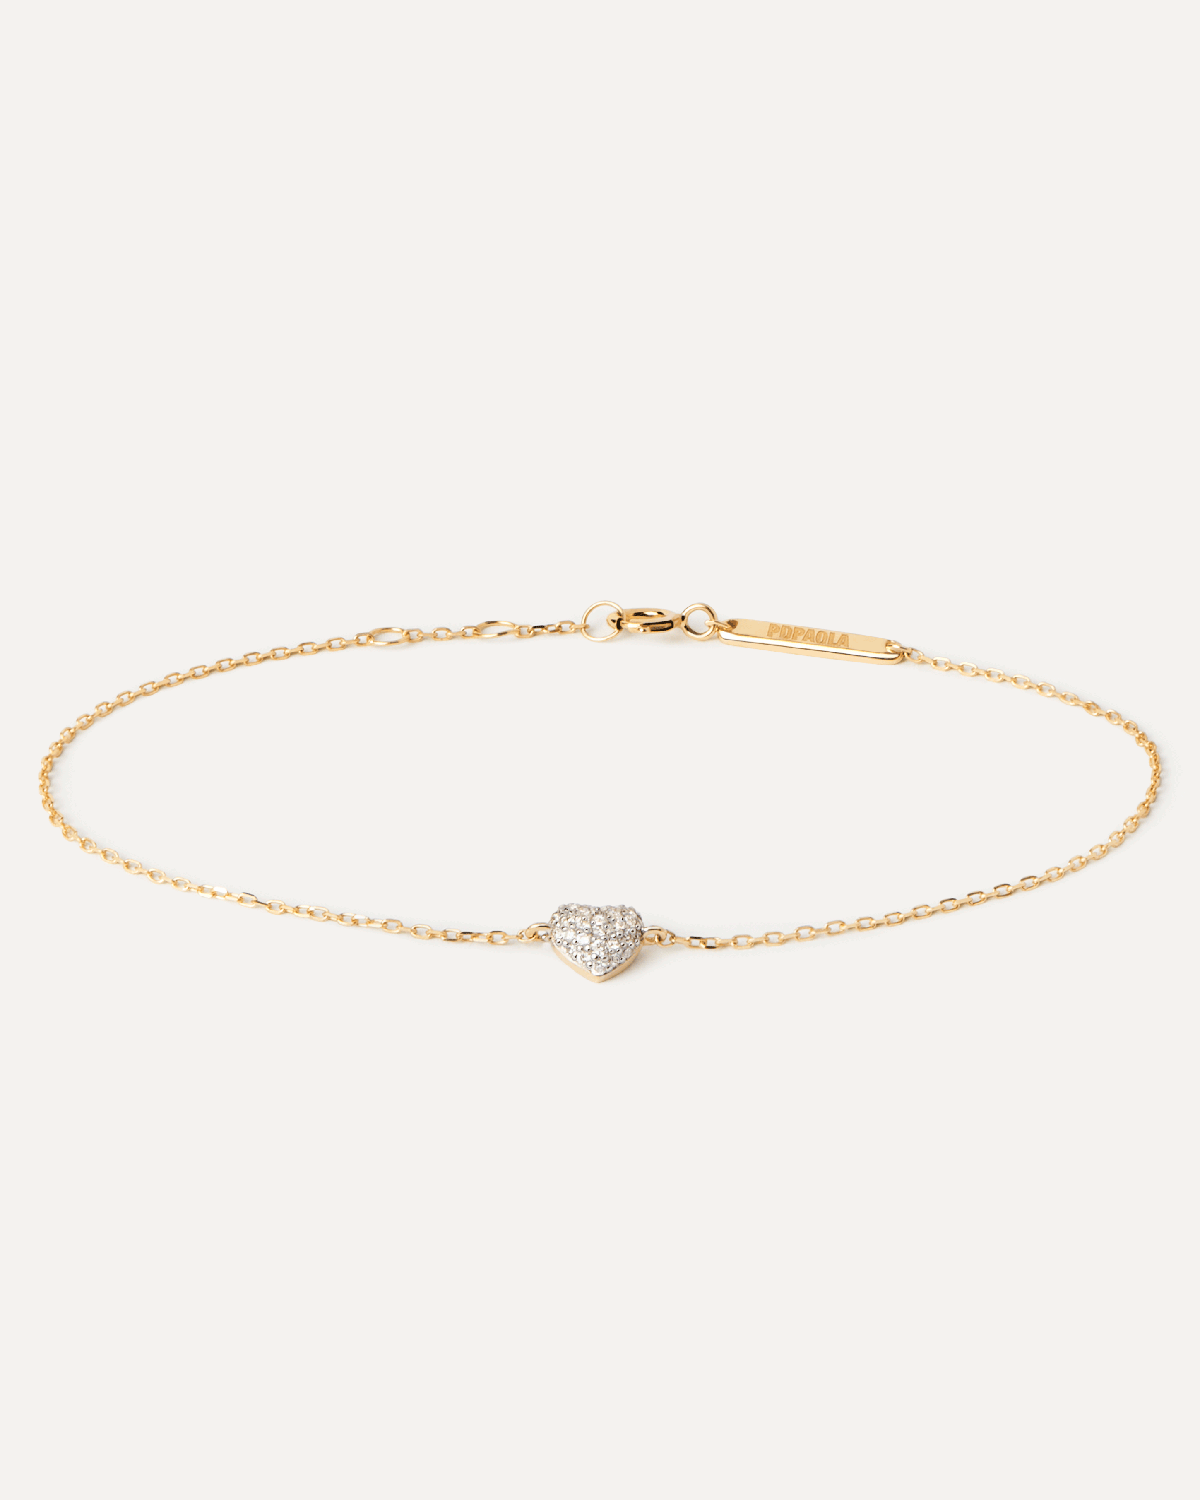 Diamonds and gold Heart bracelet. Solid yellow gold bracelet featuring a heart shape pavé lab-grown diamond of 0.11 carats. Get the latest arrival from PDPAOLA. Place your order safely and get this Best Seller.